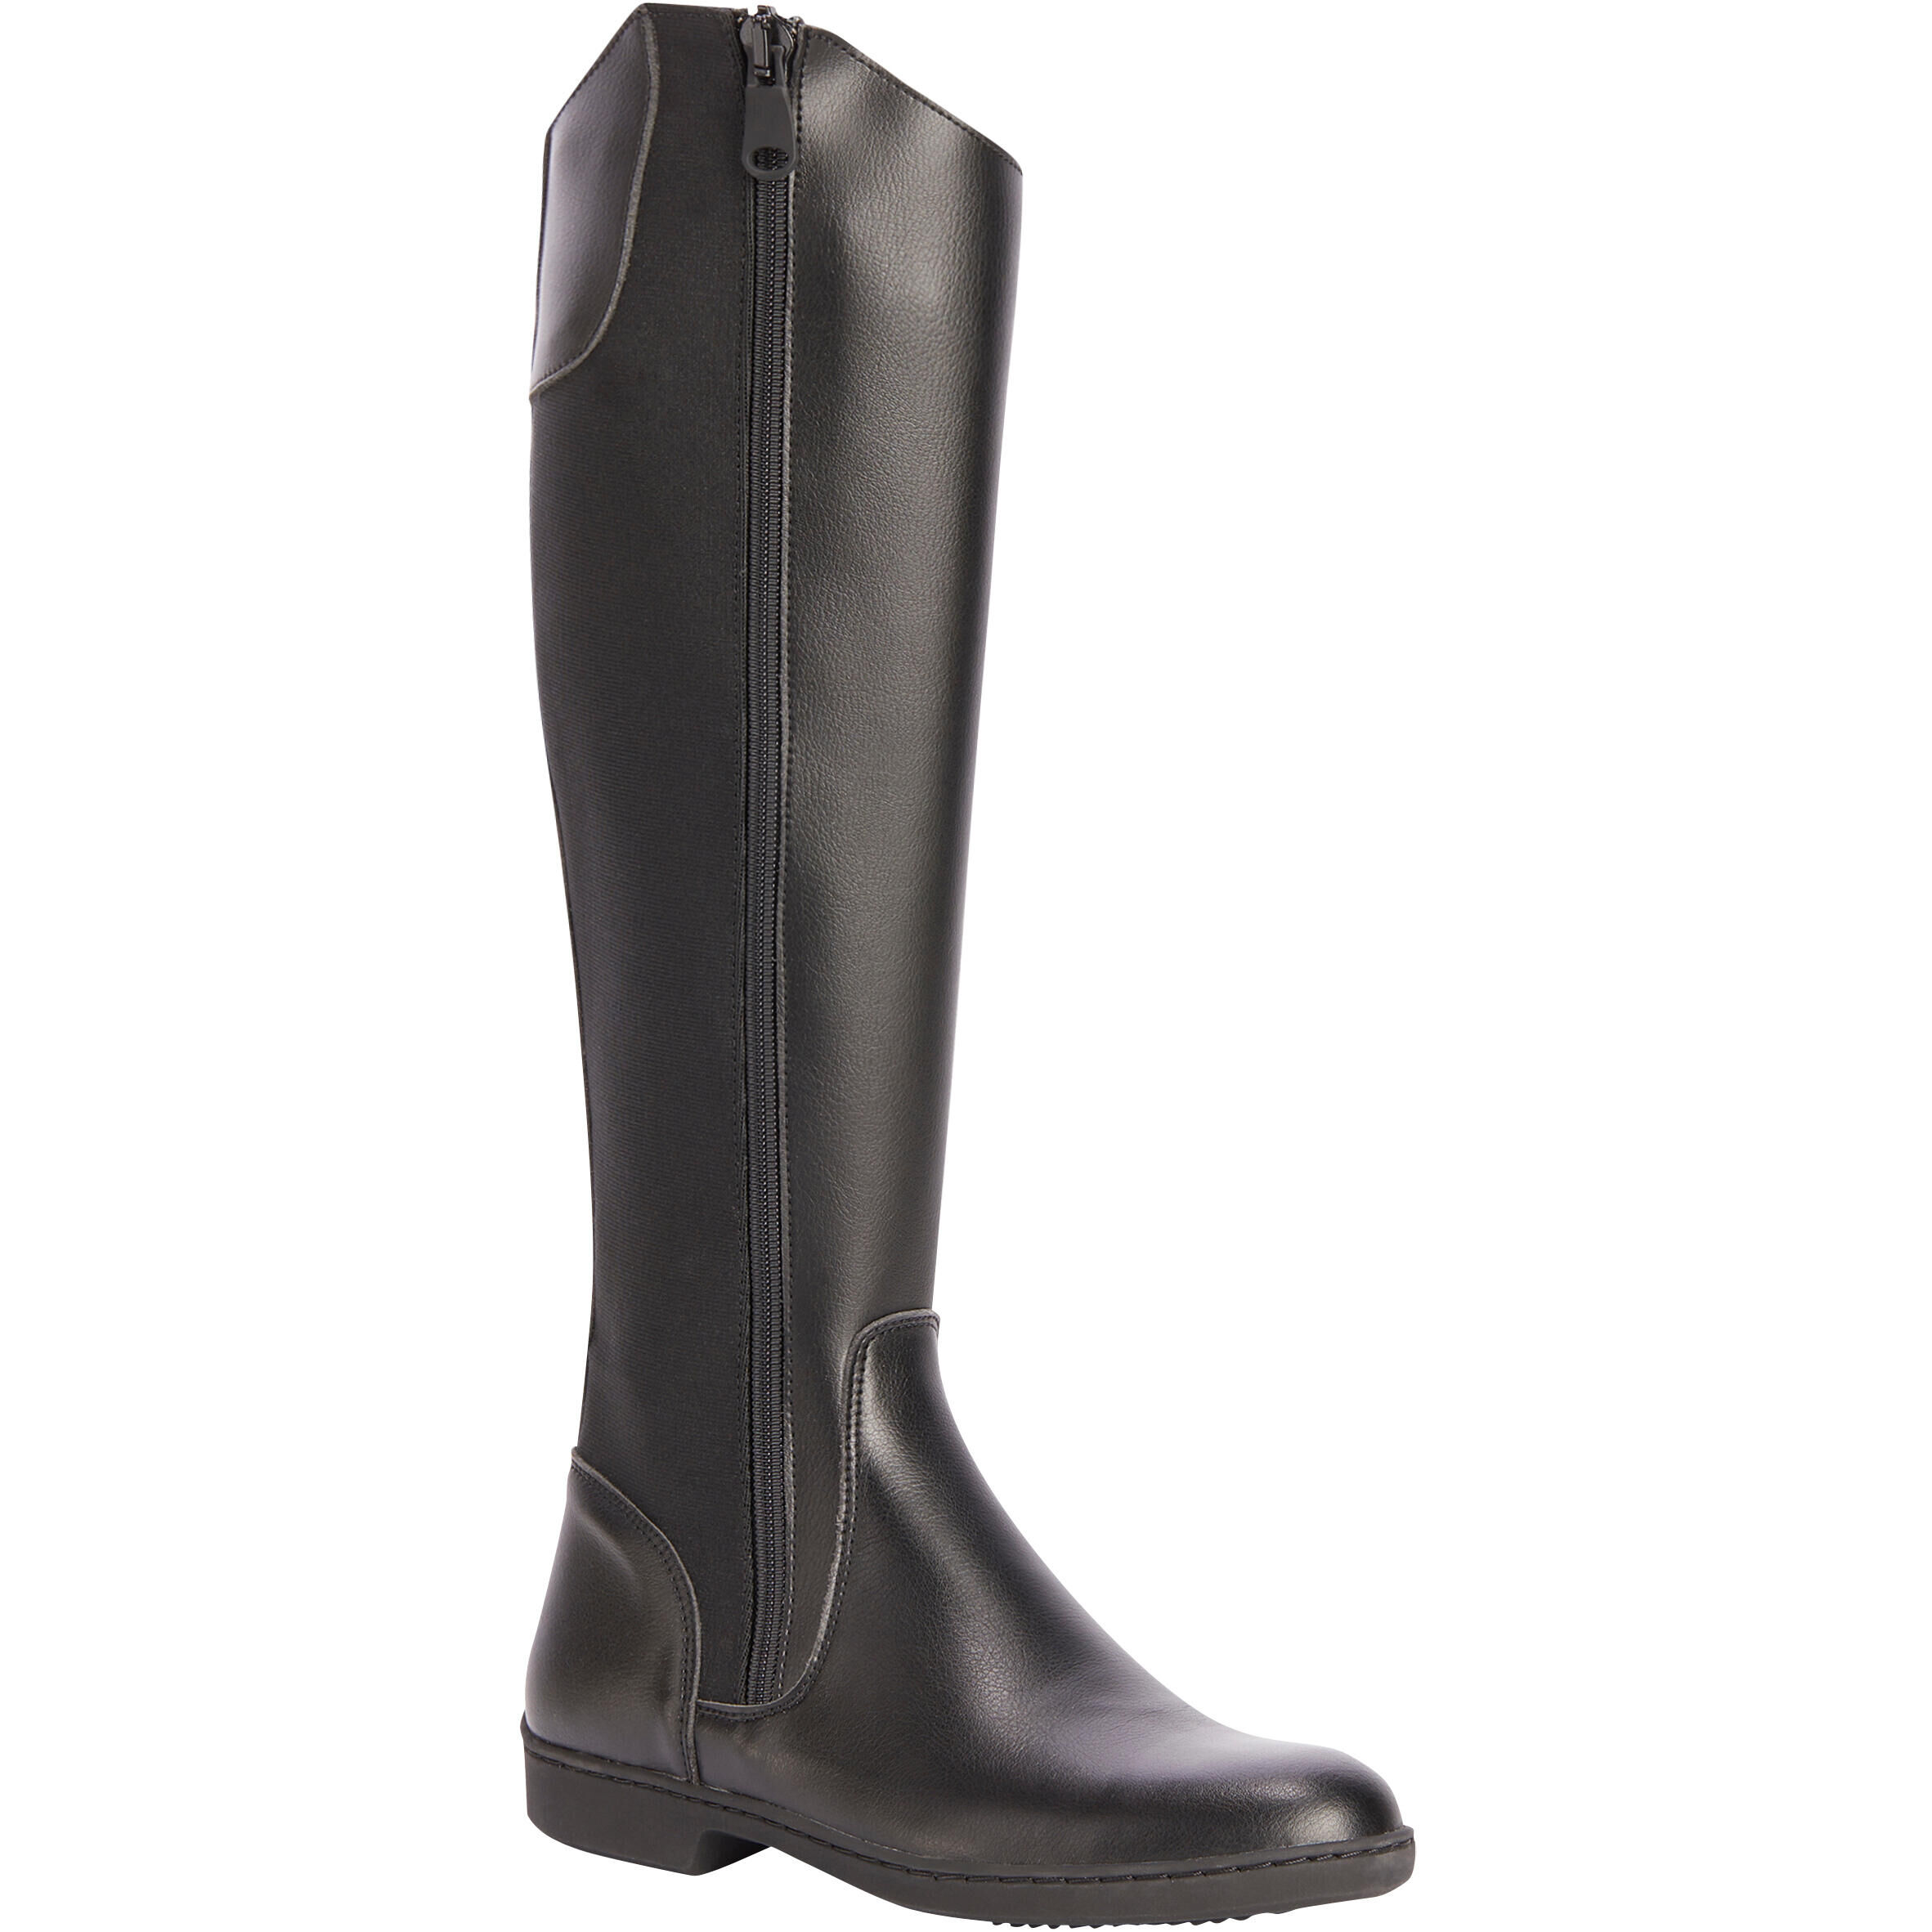 FOUGANZA 500 Adult Synthetic Horse Riding Long Boots - Black